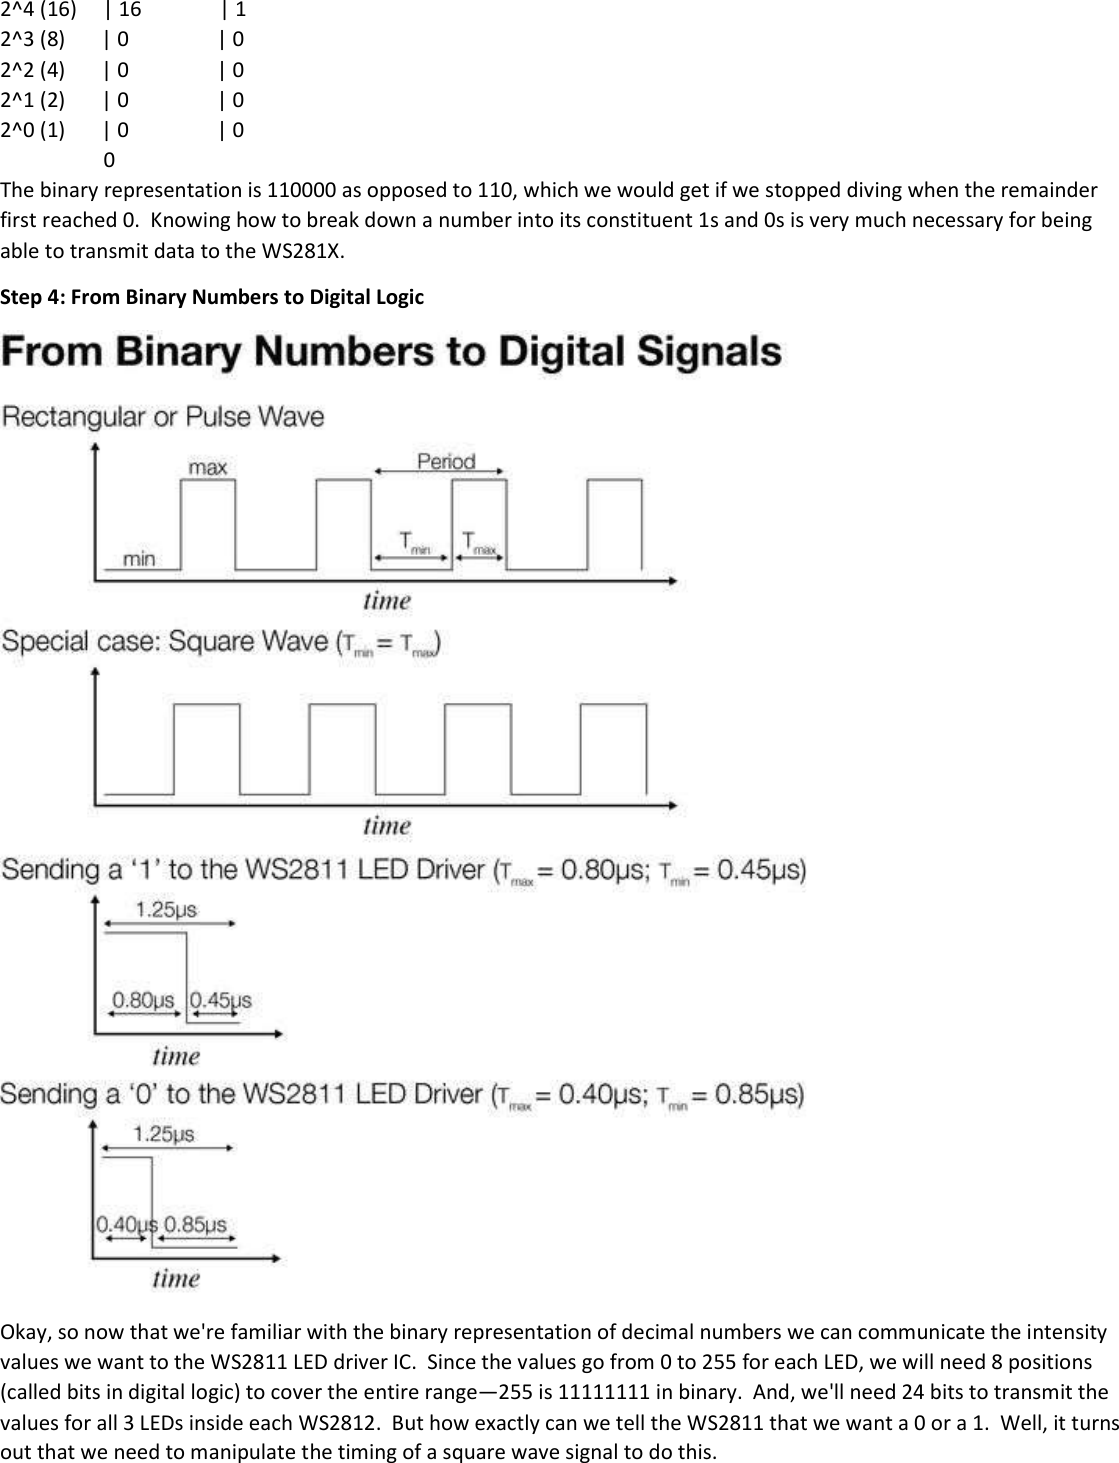 Page 6 of 11 - WS2812B LED Programming Guide